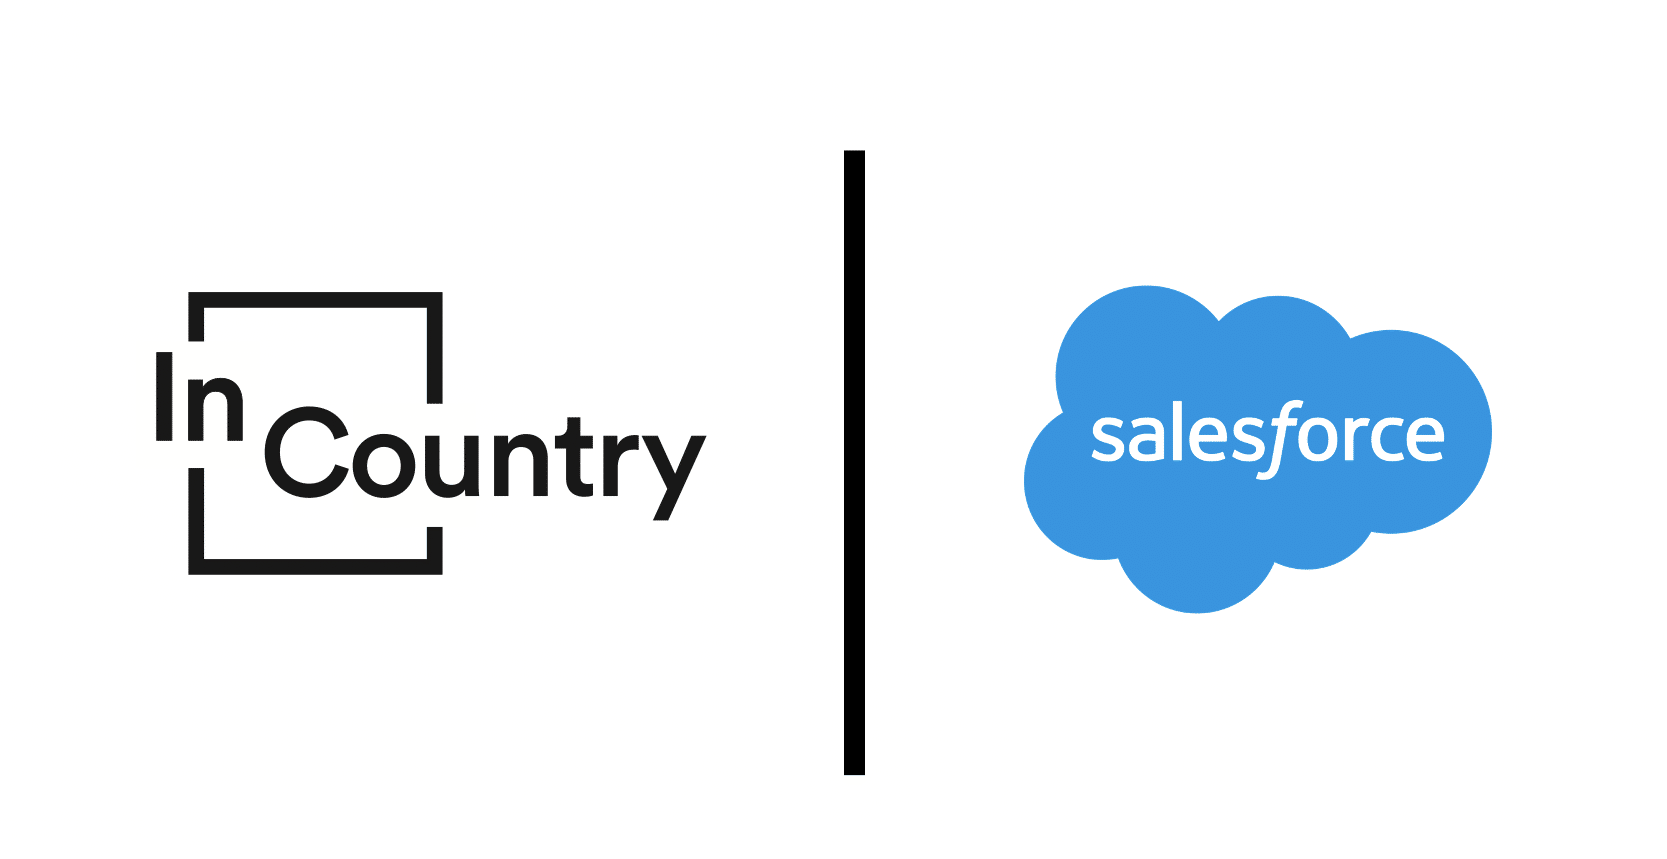 InCountry for Salesforce